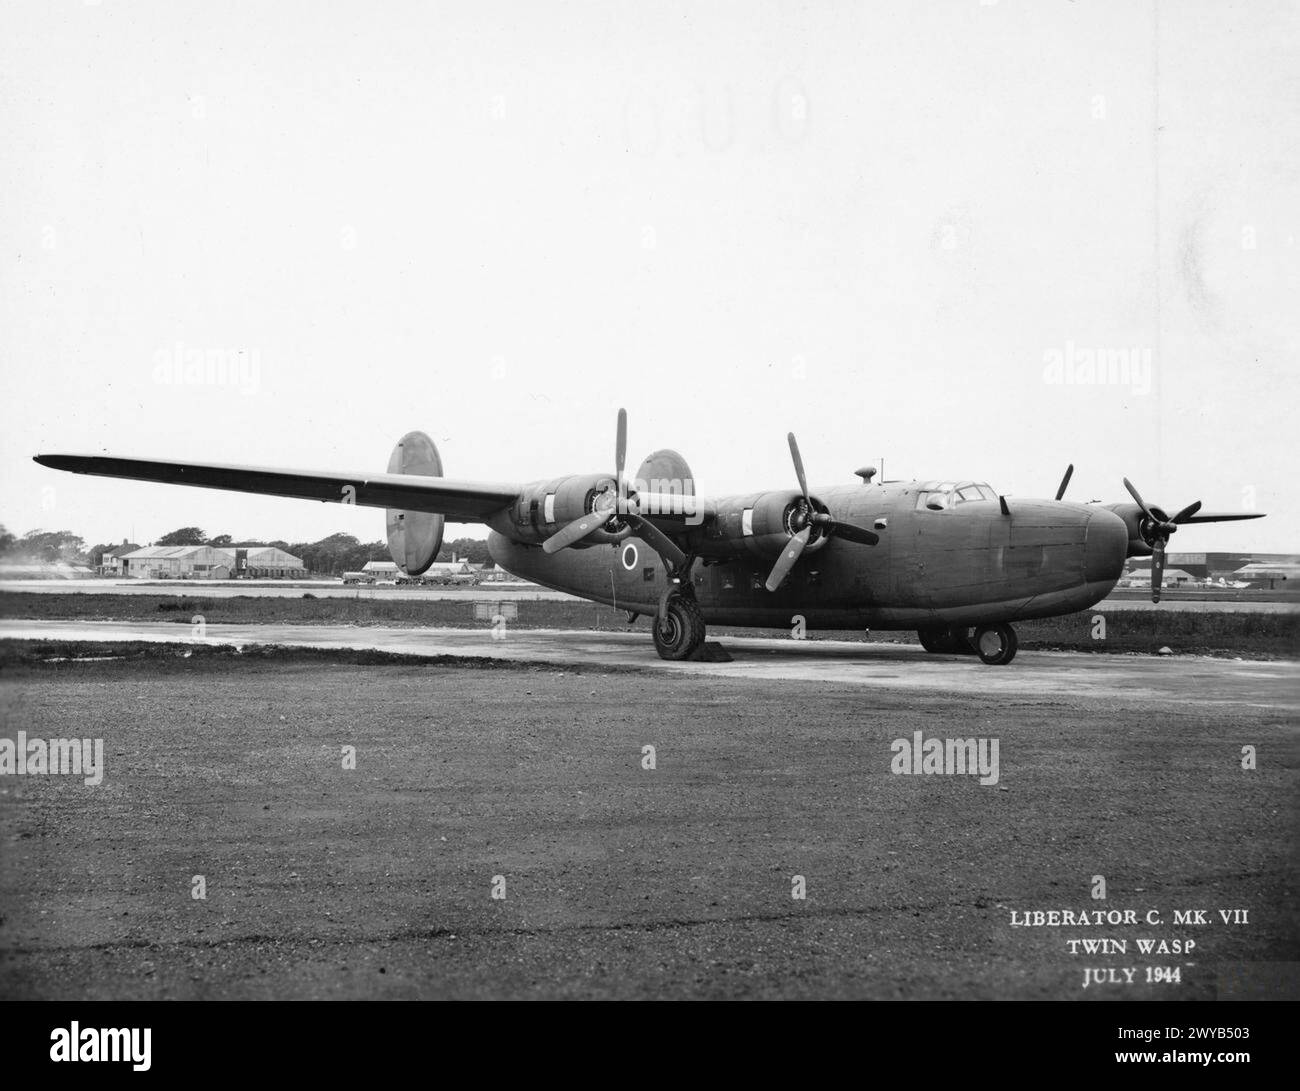 AMERICAN AIRCRAFT IN ROYAL AIR FORCE SERVICE 1939-1945: CONSOLIDATED LIBERATOR. - Liberator C Mark VII, EW615, on the ground at Prestwick, Ayrshire, after its delivery flight. The aircraft served with Nos. 511 and 232 Squadrons RAF. , Royal Air Force, Maintenance Unit, 233, Royal Air Force, 511 Squadron Stock Photo